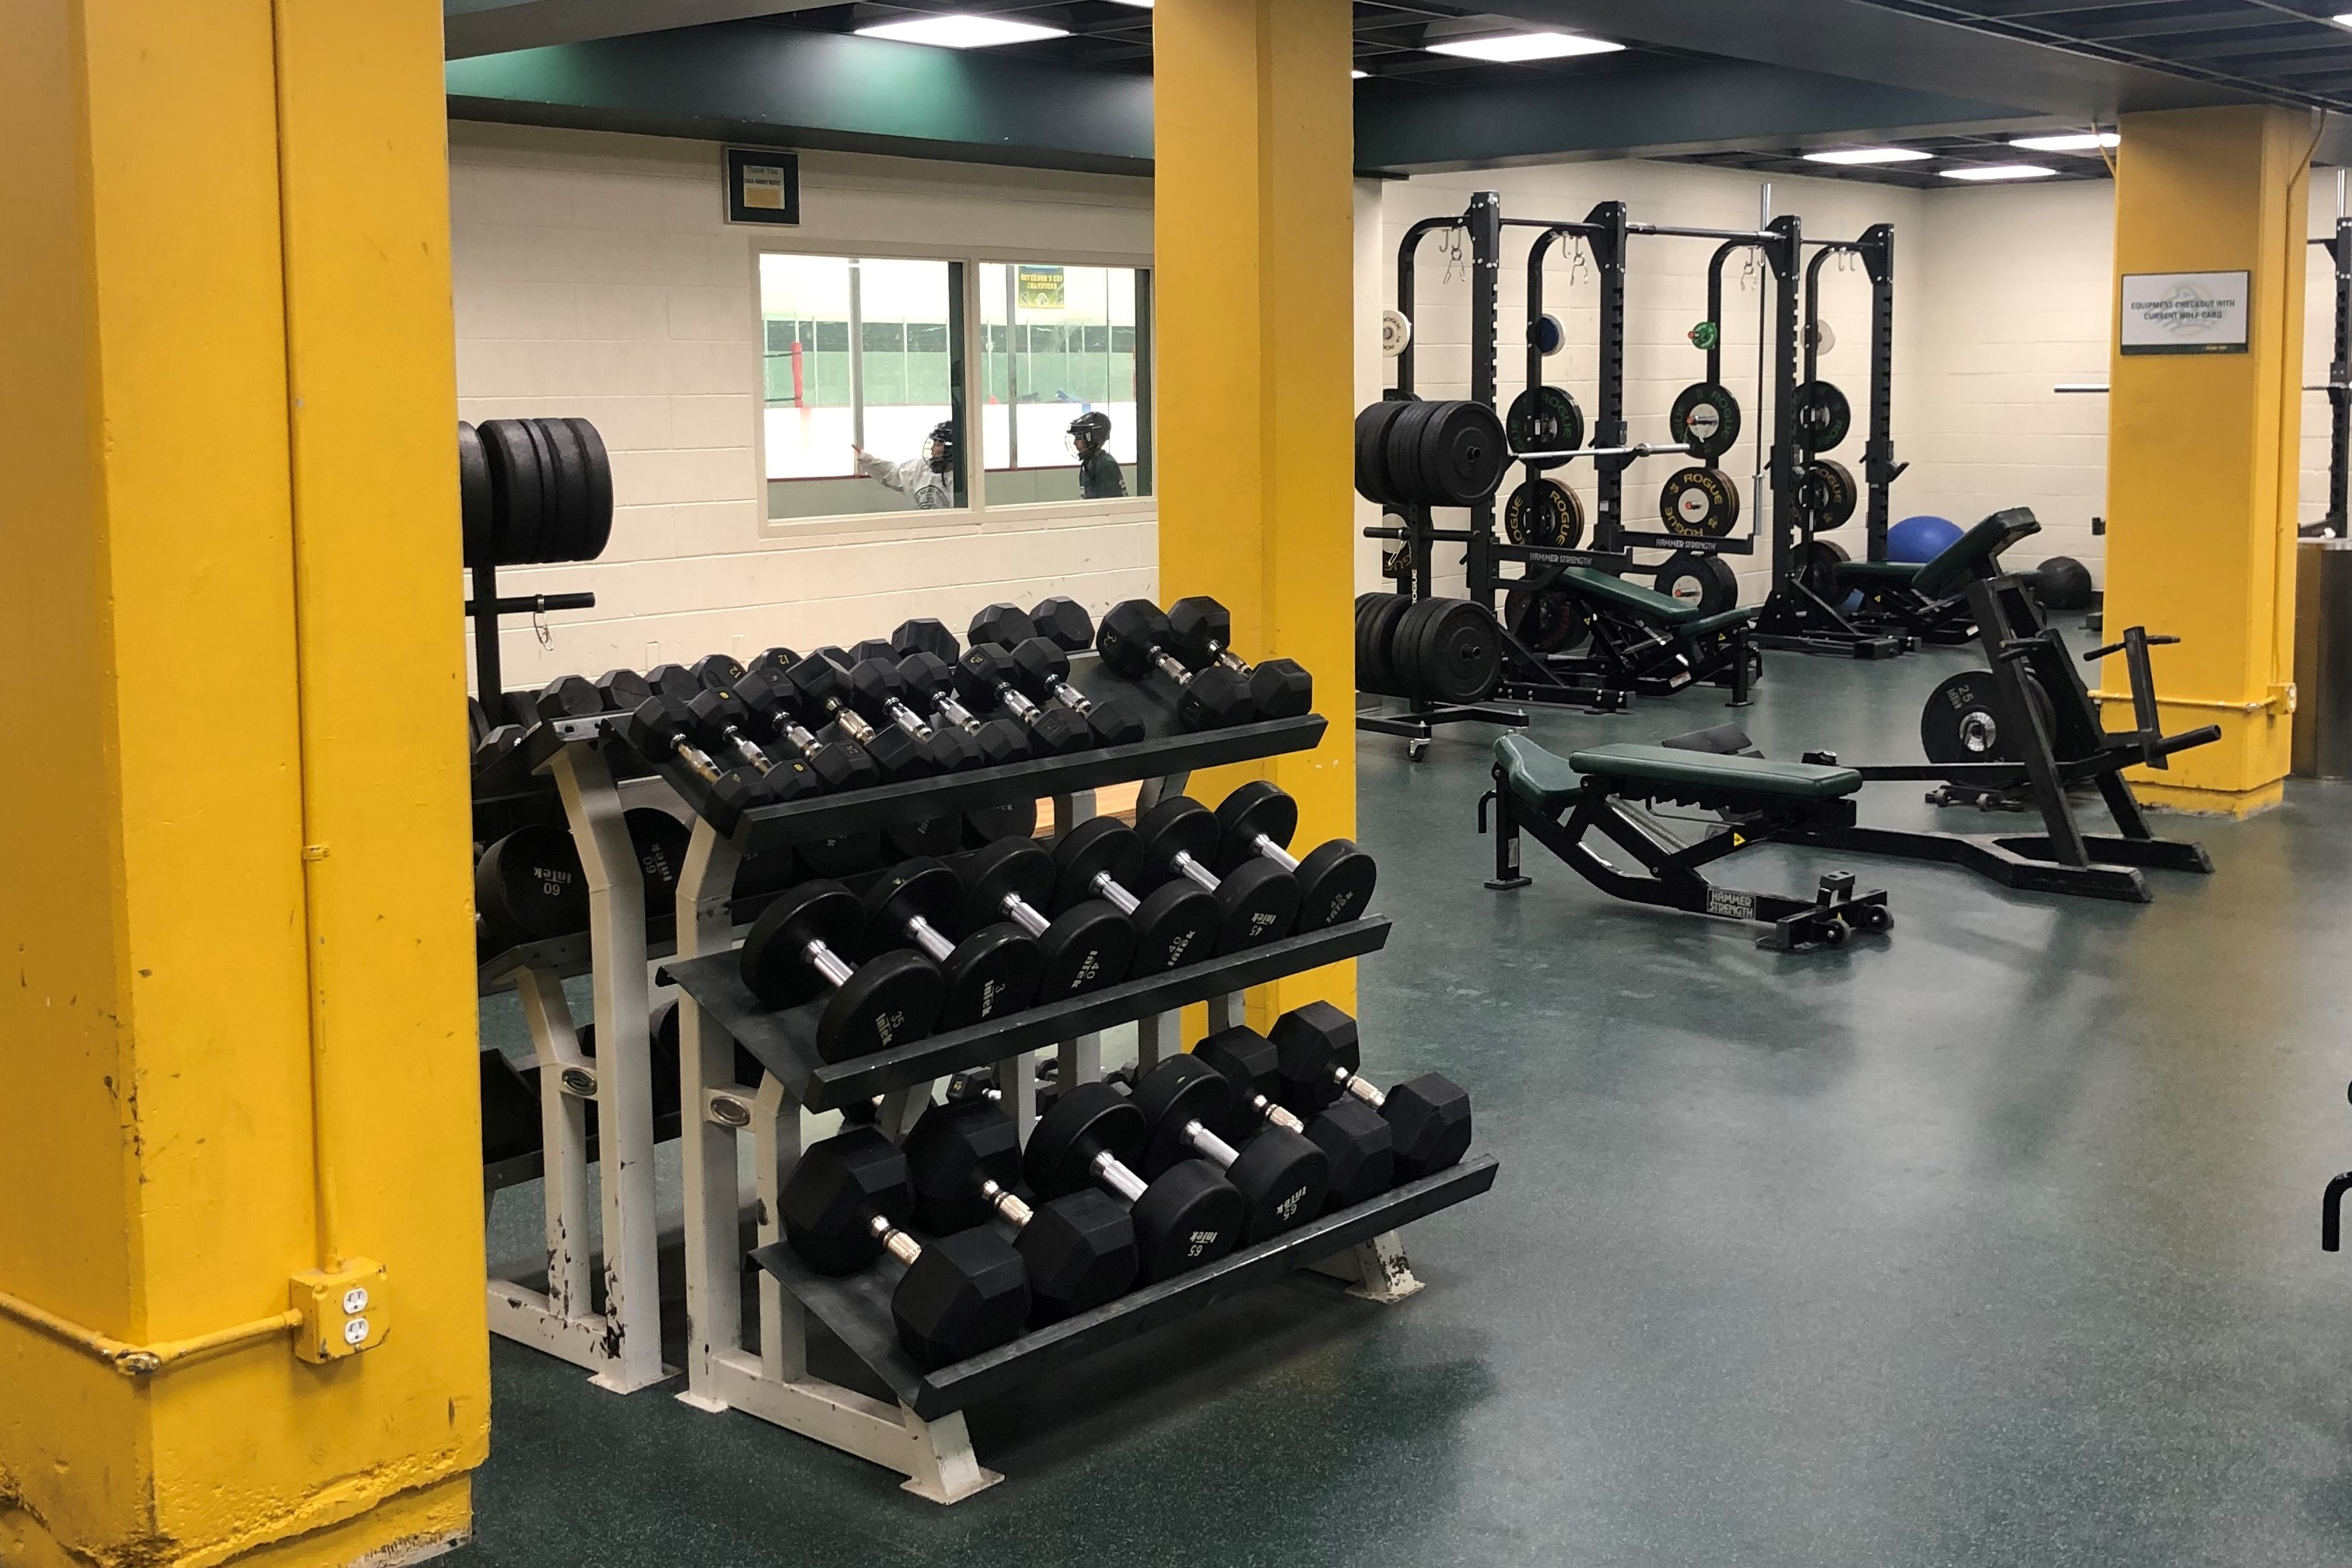 seawolf sports complex Olyimpic weight room